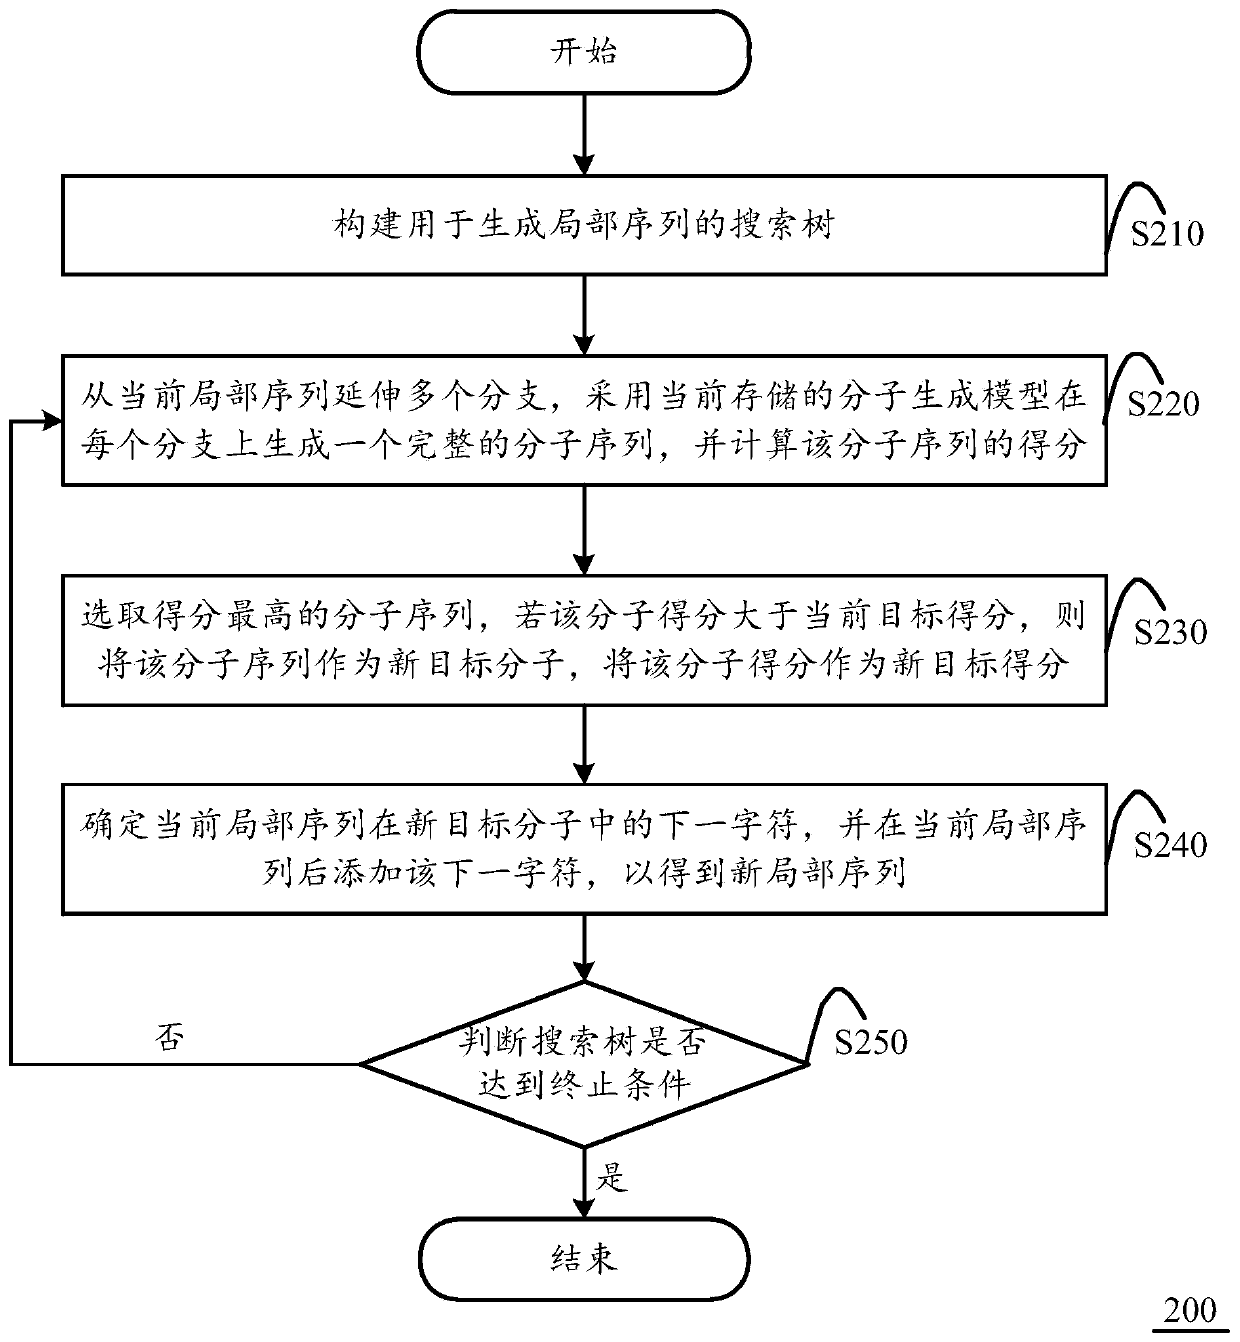 Molecular sequence generation method and apparatus, and computing equipment